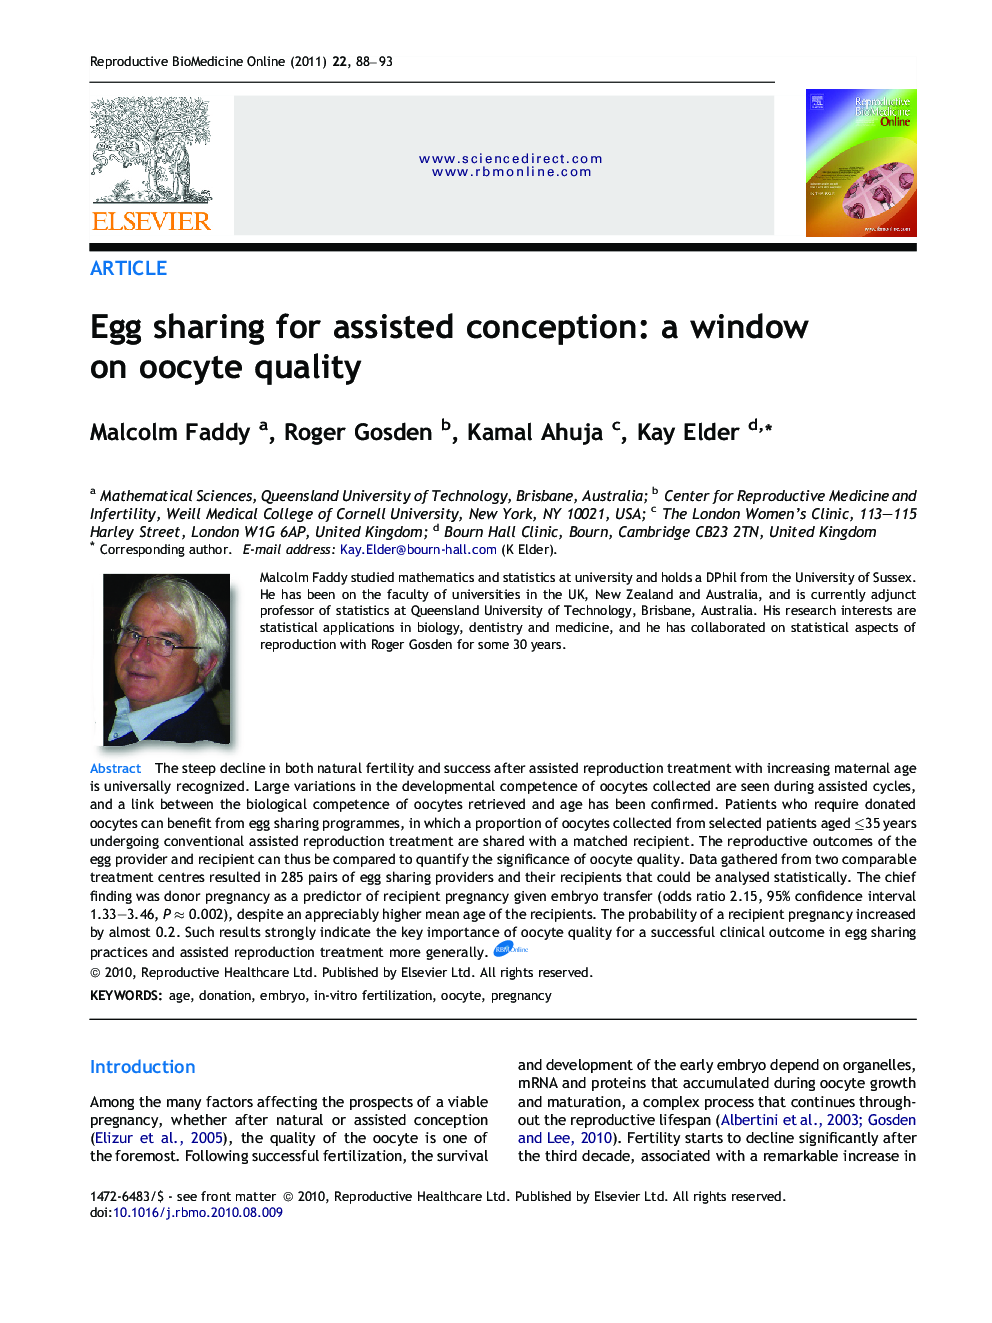 Egg sharing for assisted conception: a window on oocyte quality 